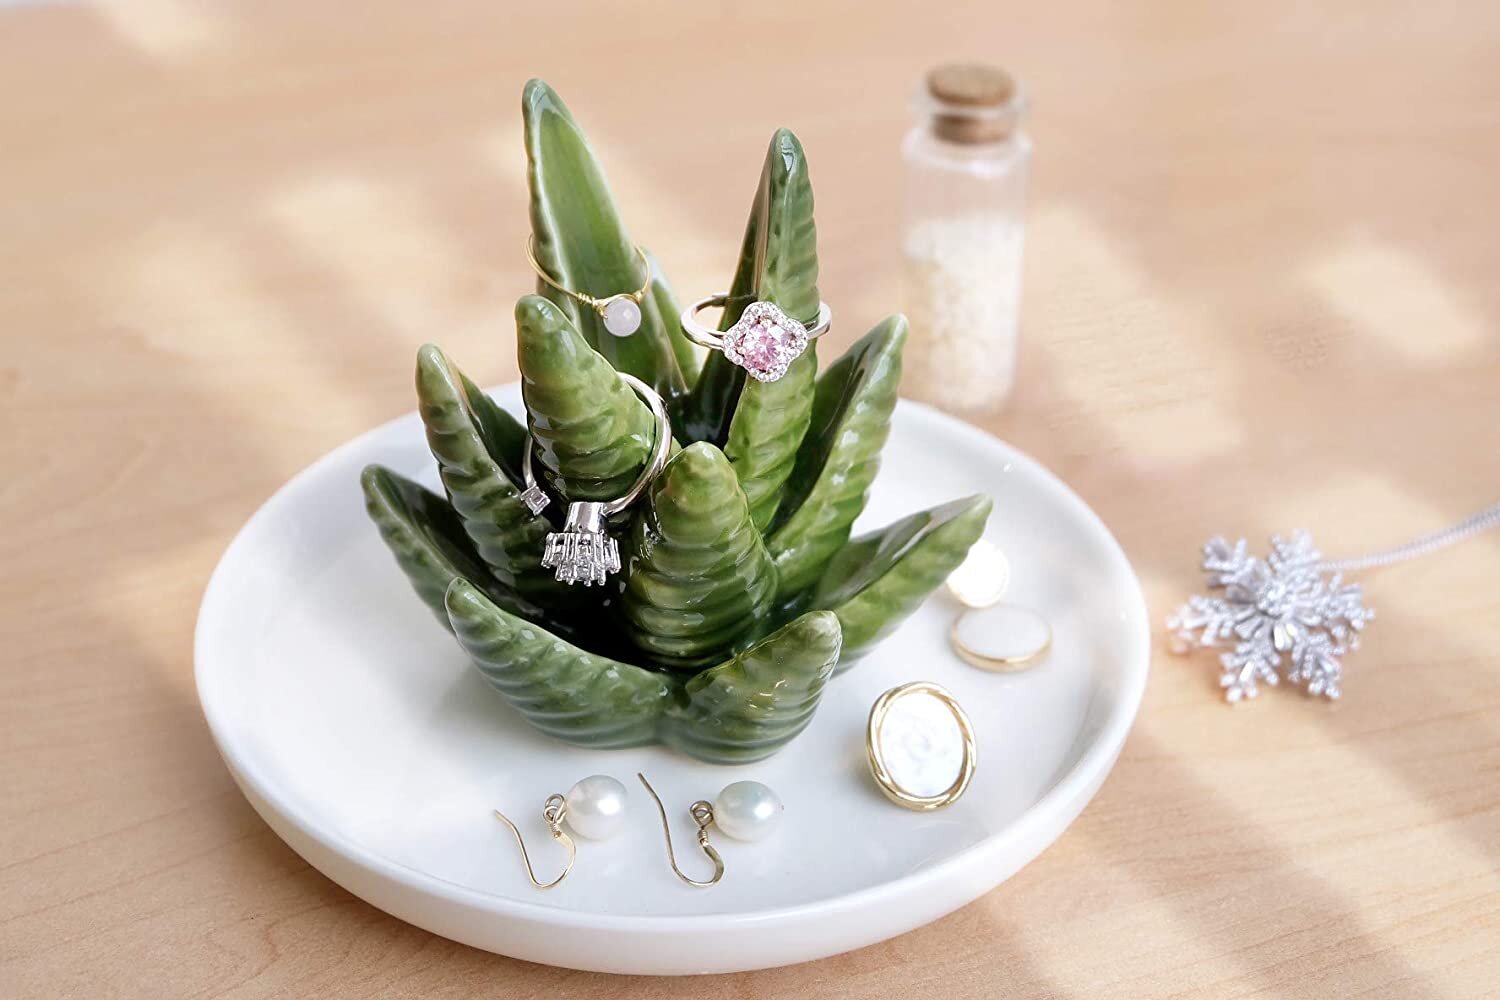 Cute Aloe Plant Ceramic Ring Tray Holder Dish Trinket Jewelry Keys Entryway Decorative Wedding Engagement Necklace Earrings Gift for Her